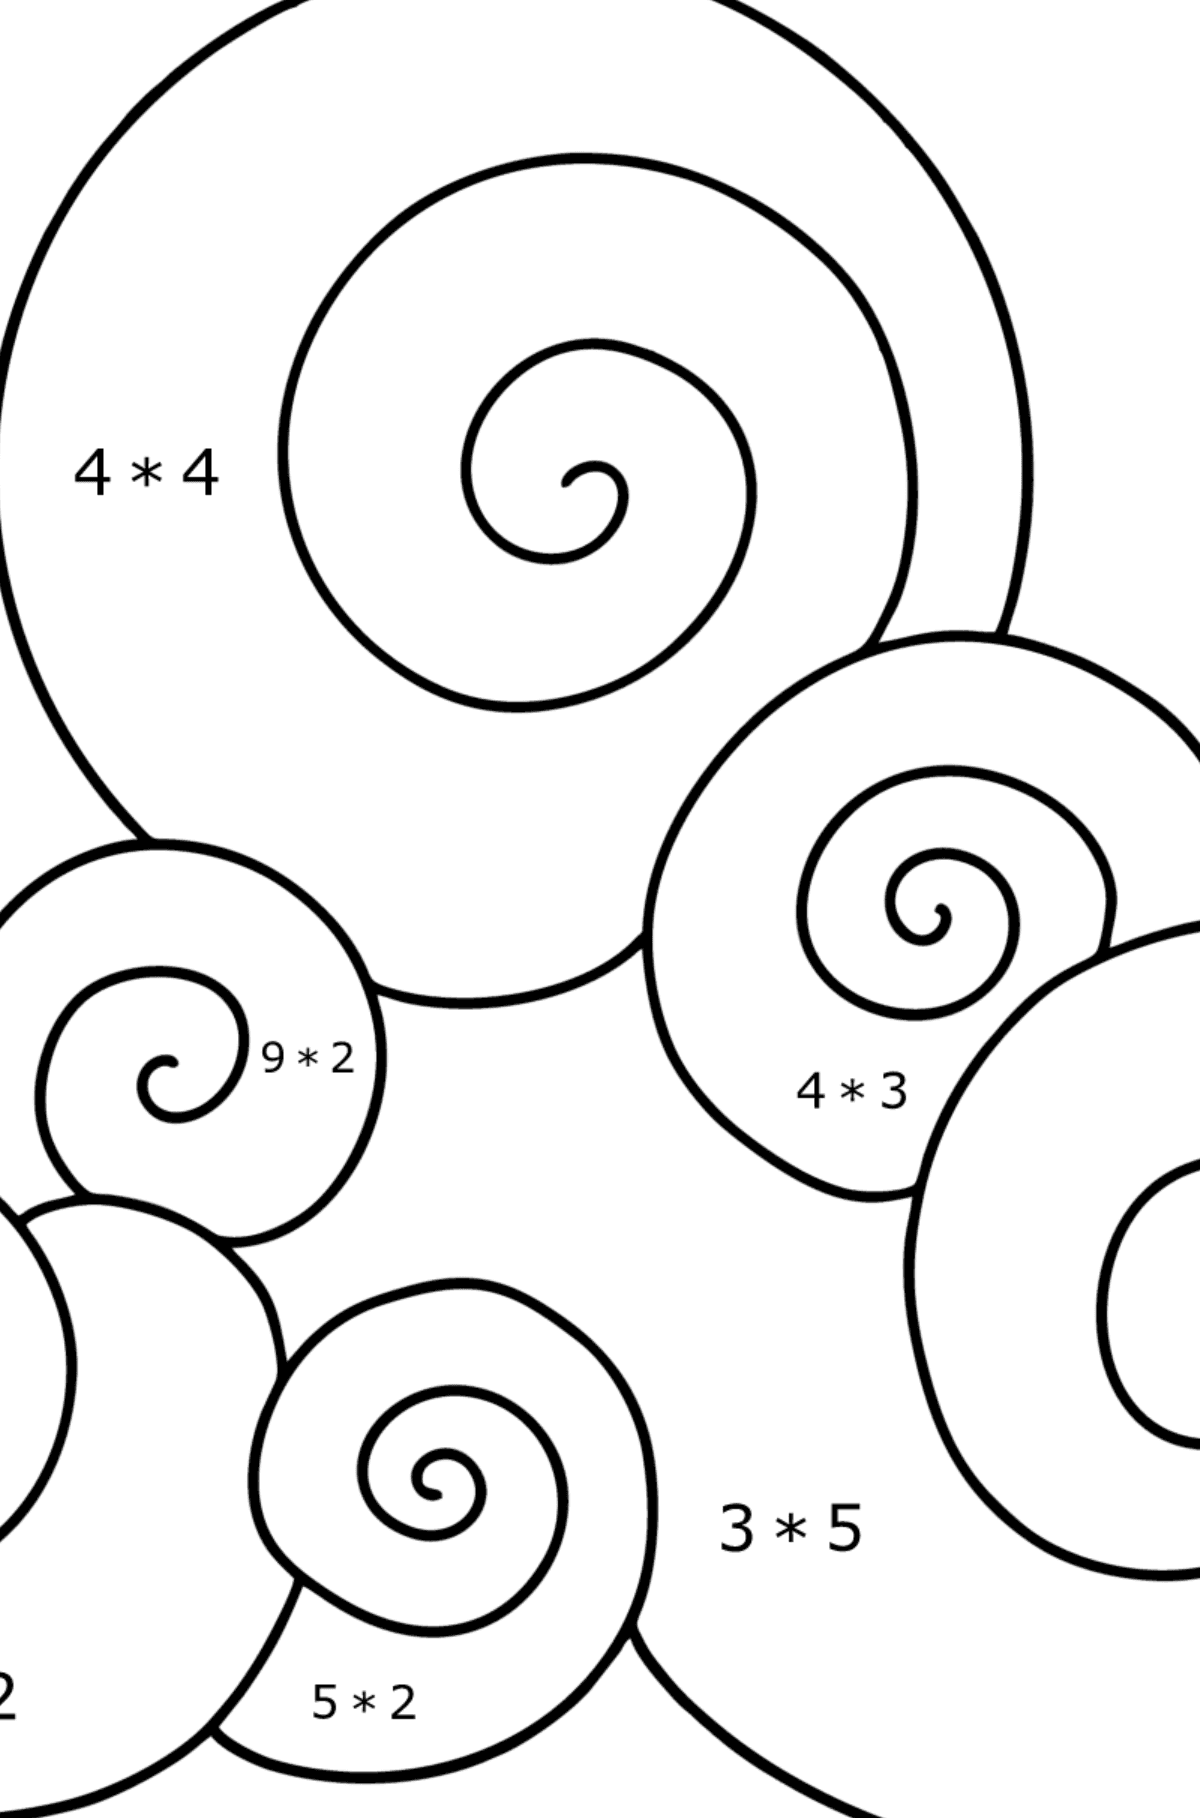 Simple Zen clouds coloring page - Math Coloring - Multiplication for Kids